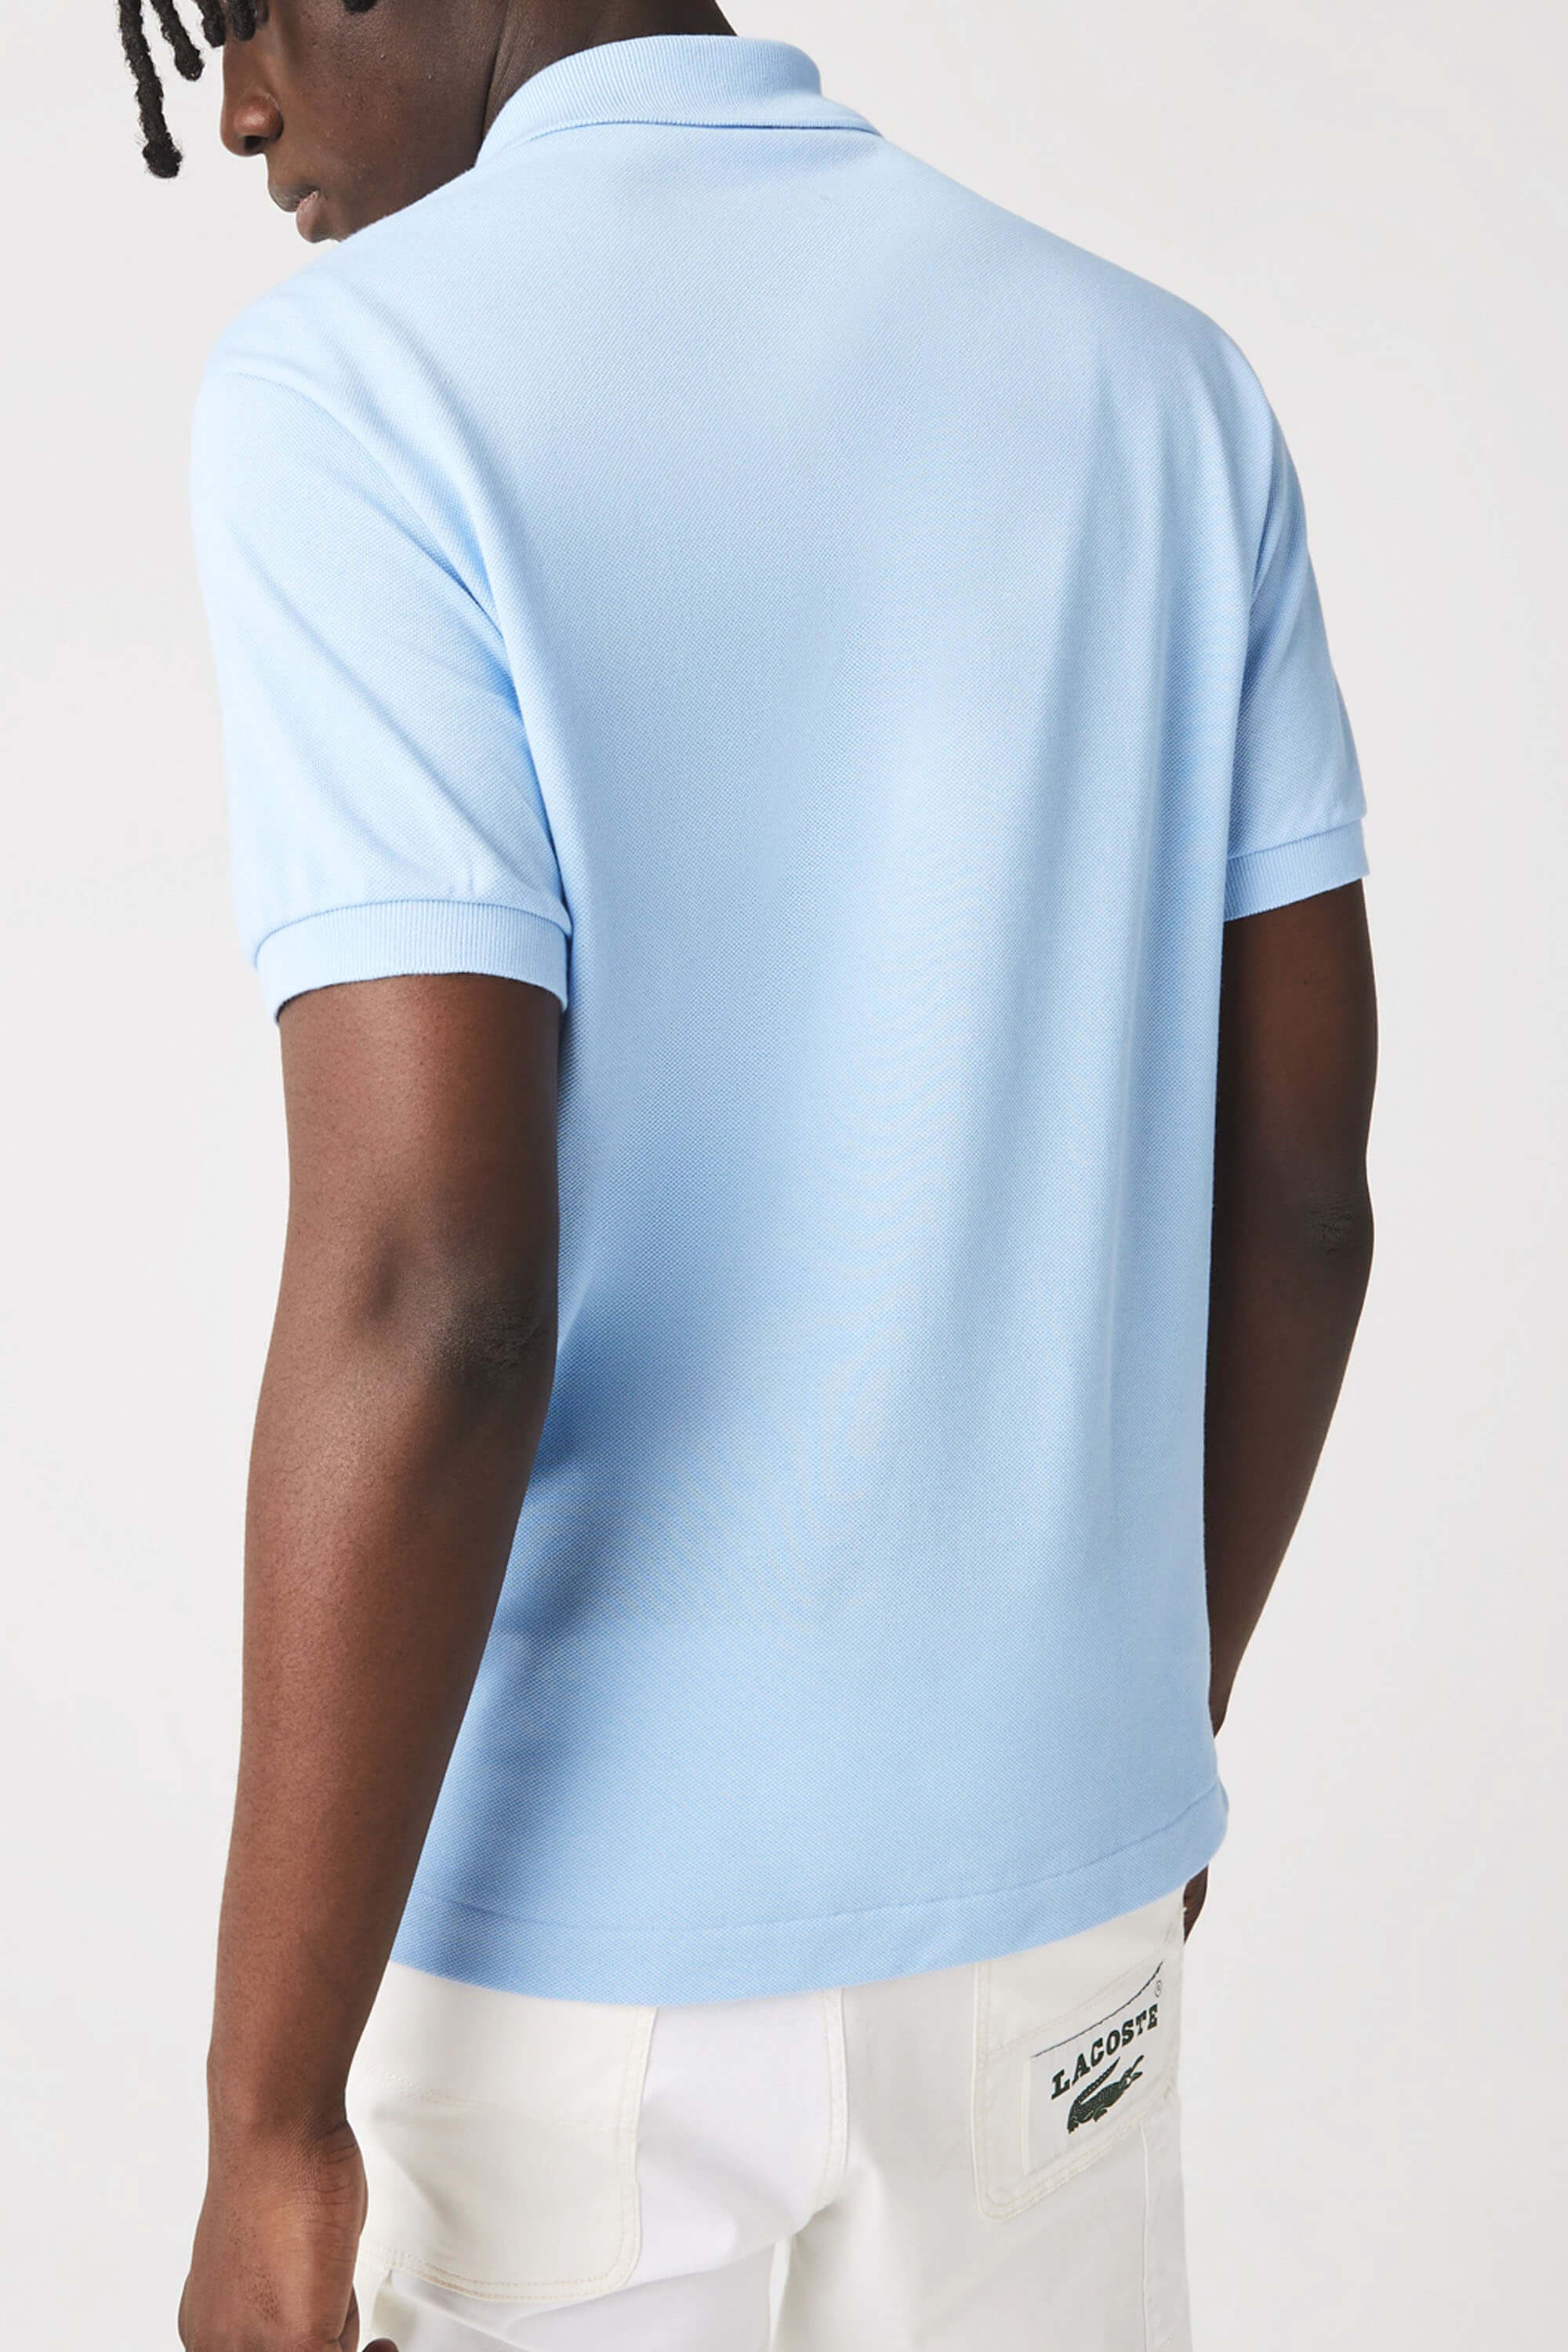 Lacoste Classic Fit Blue Polo